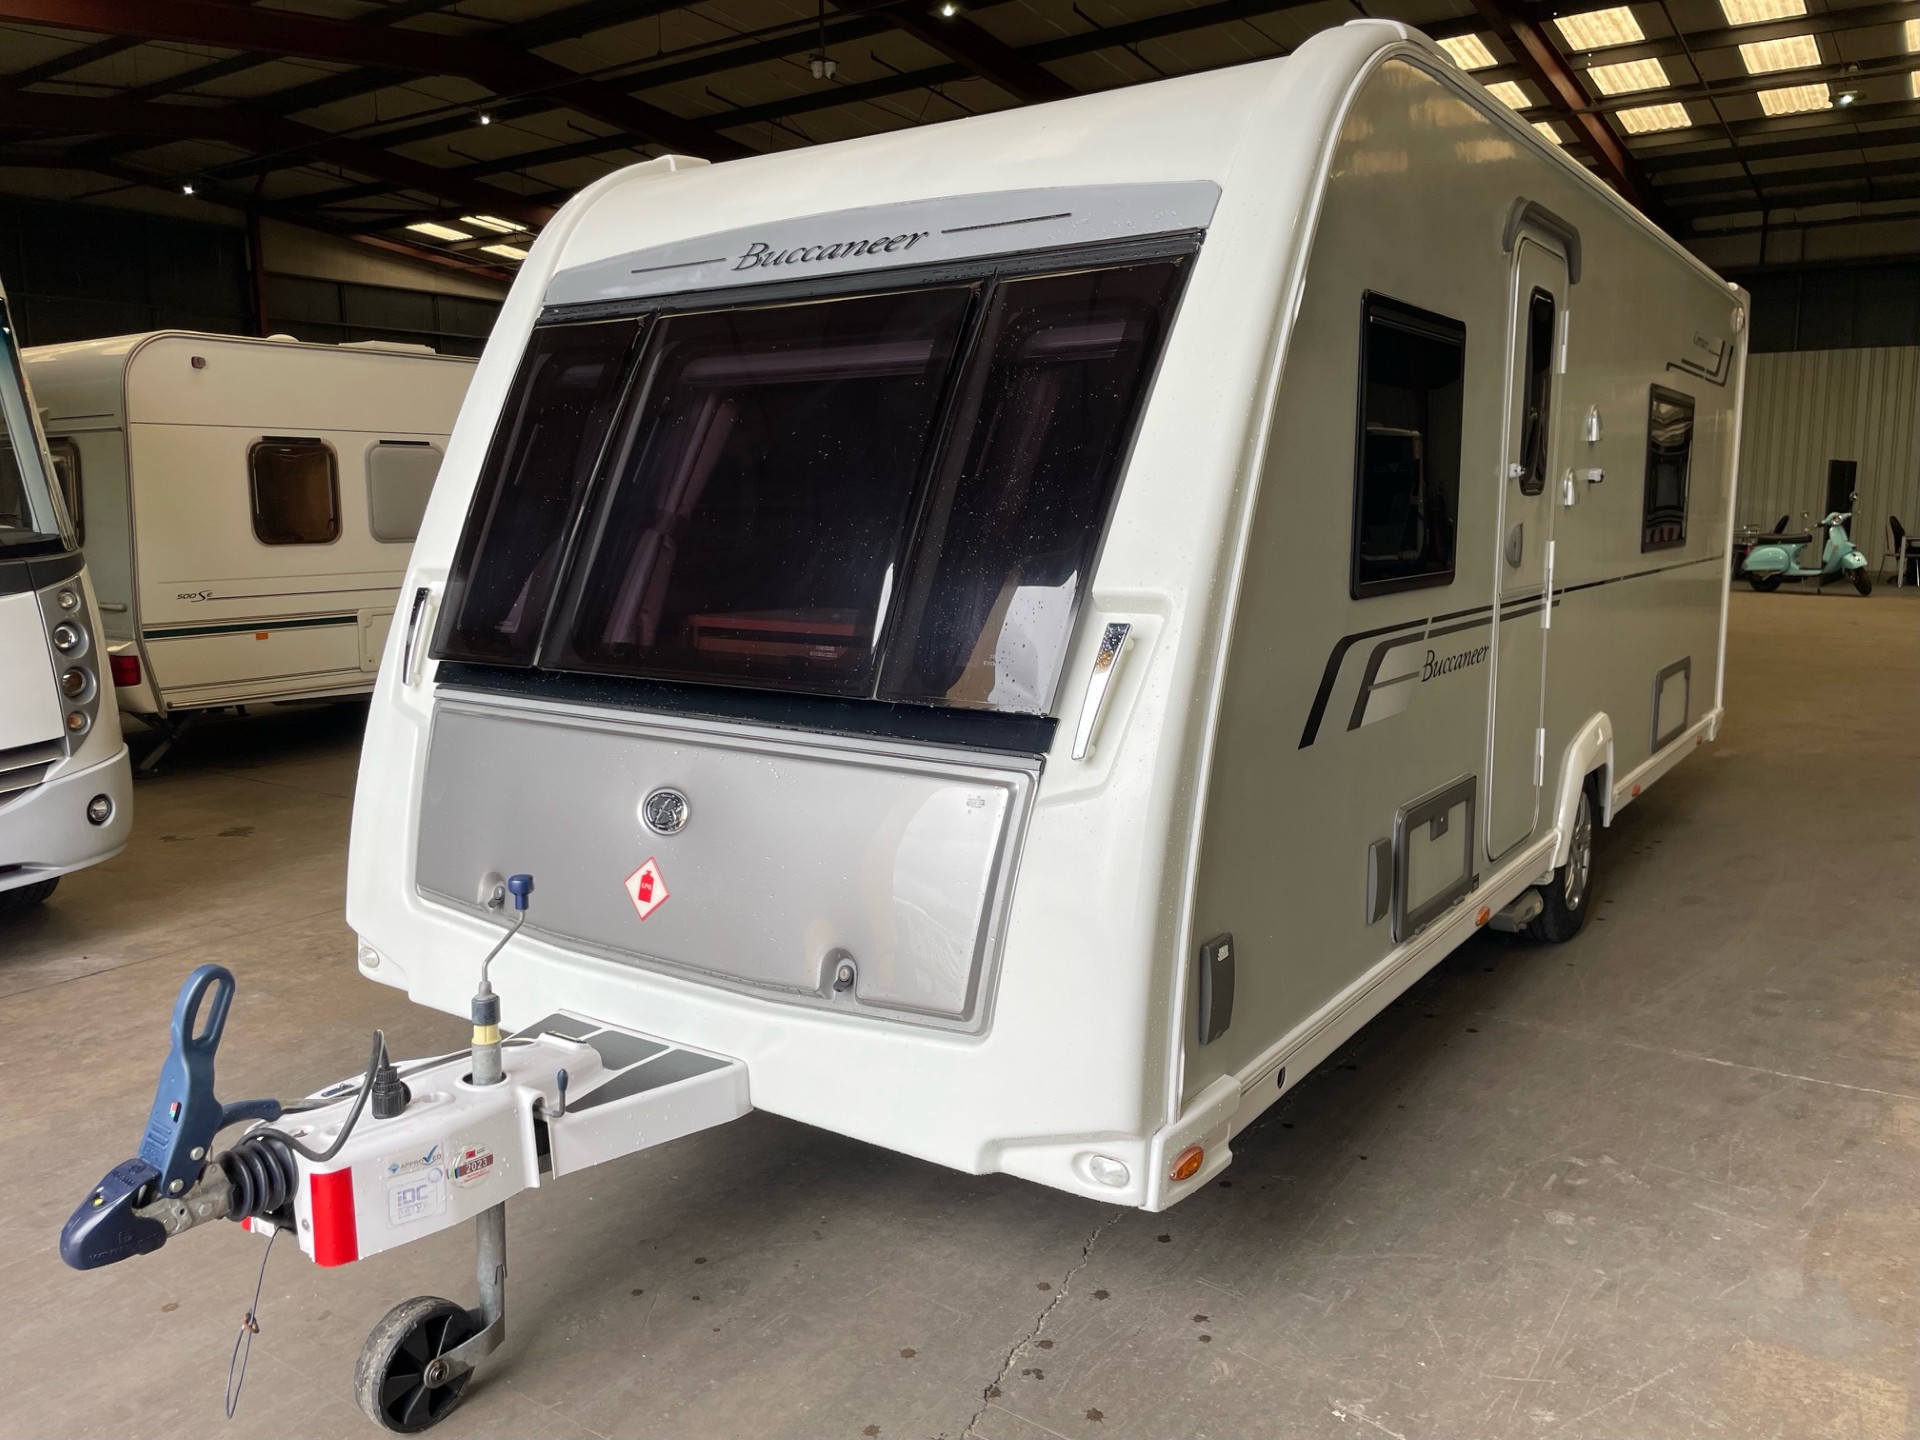 Buccaneer Corsair - 4 Berth Fixed Bed Caravan With Motor Mover And Awning